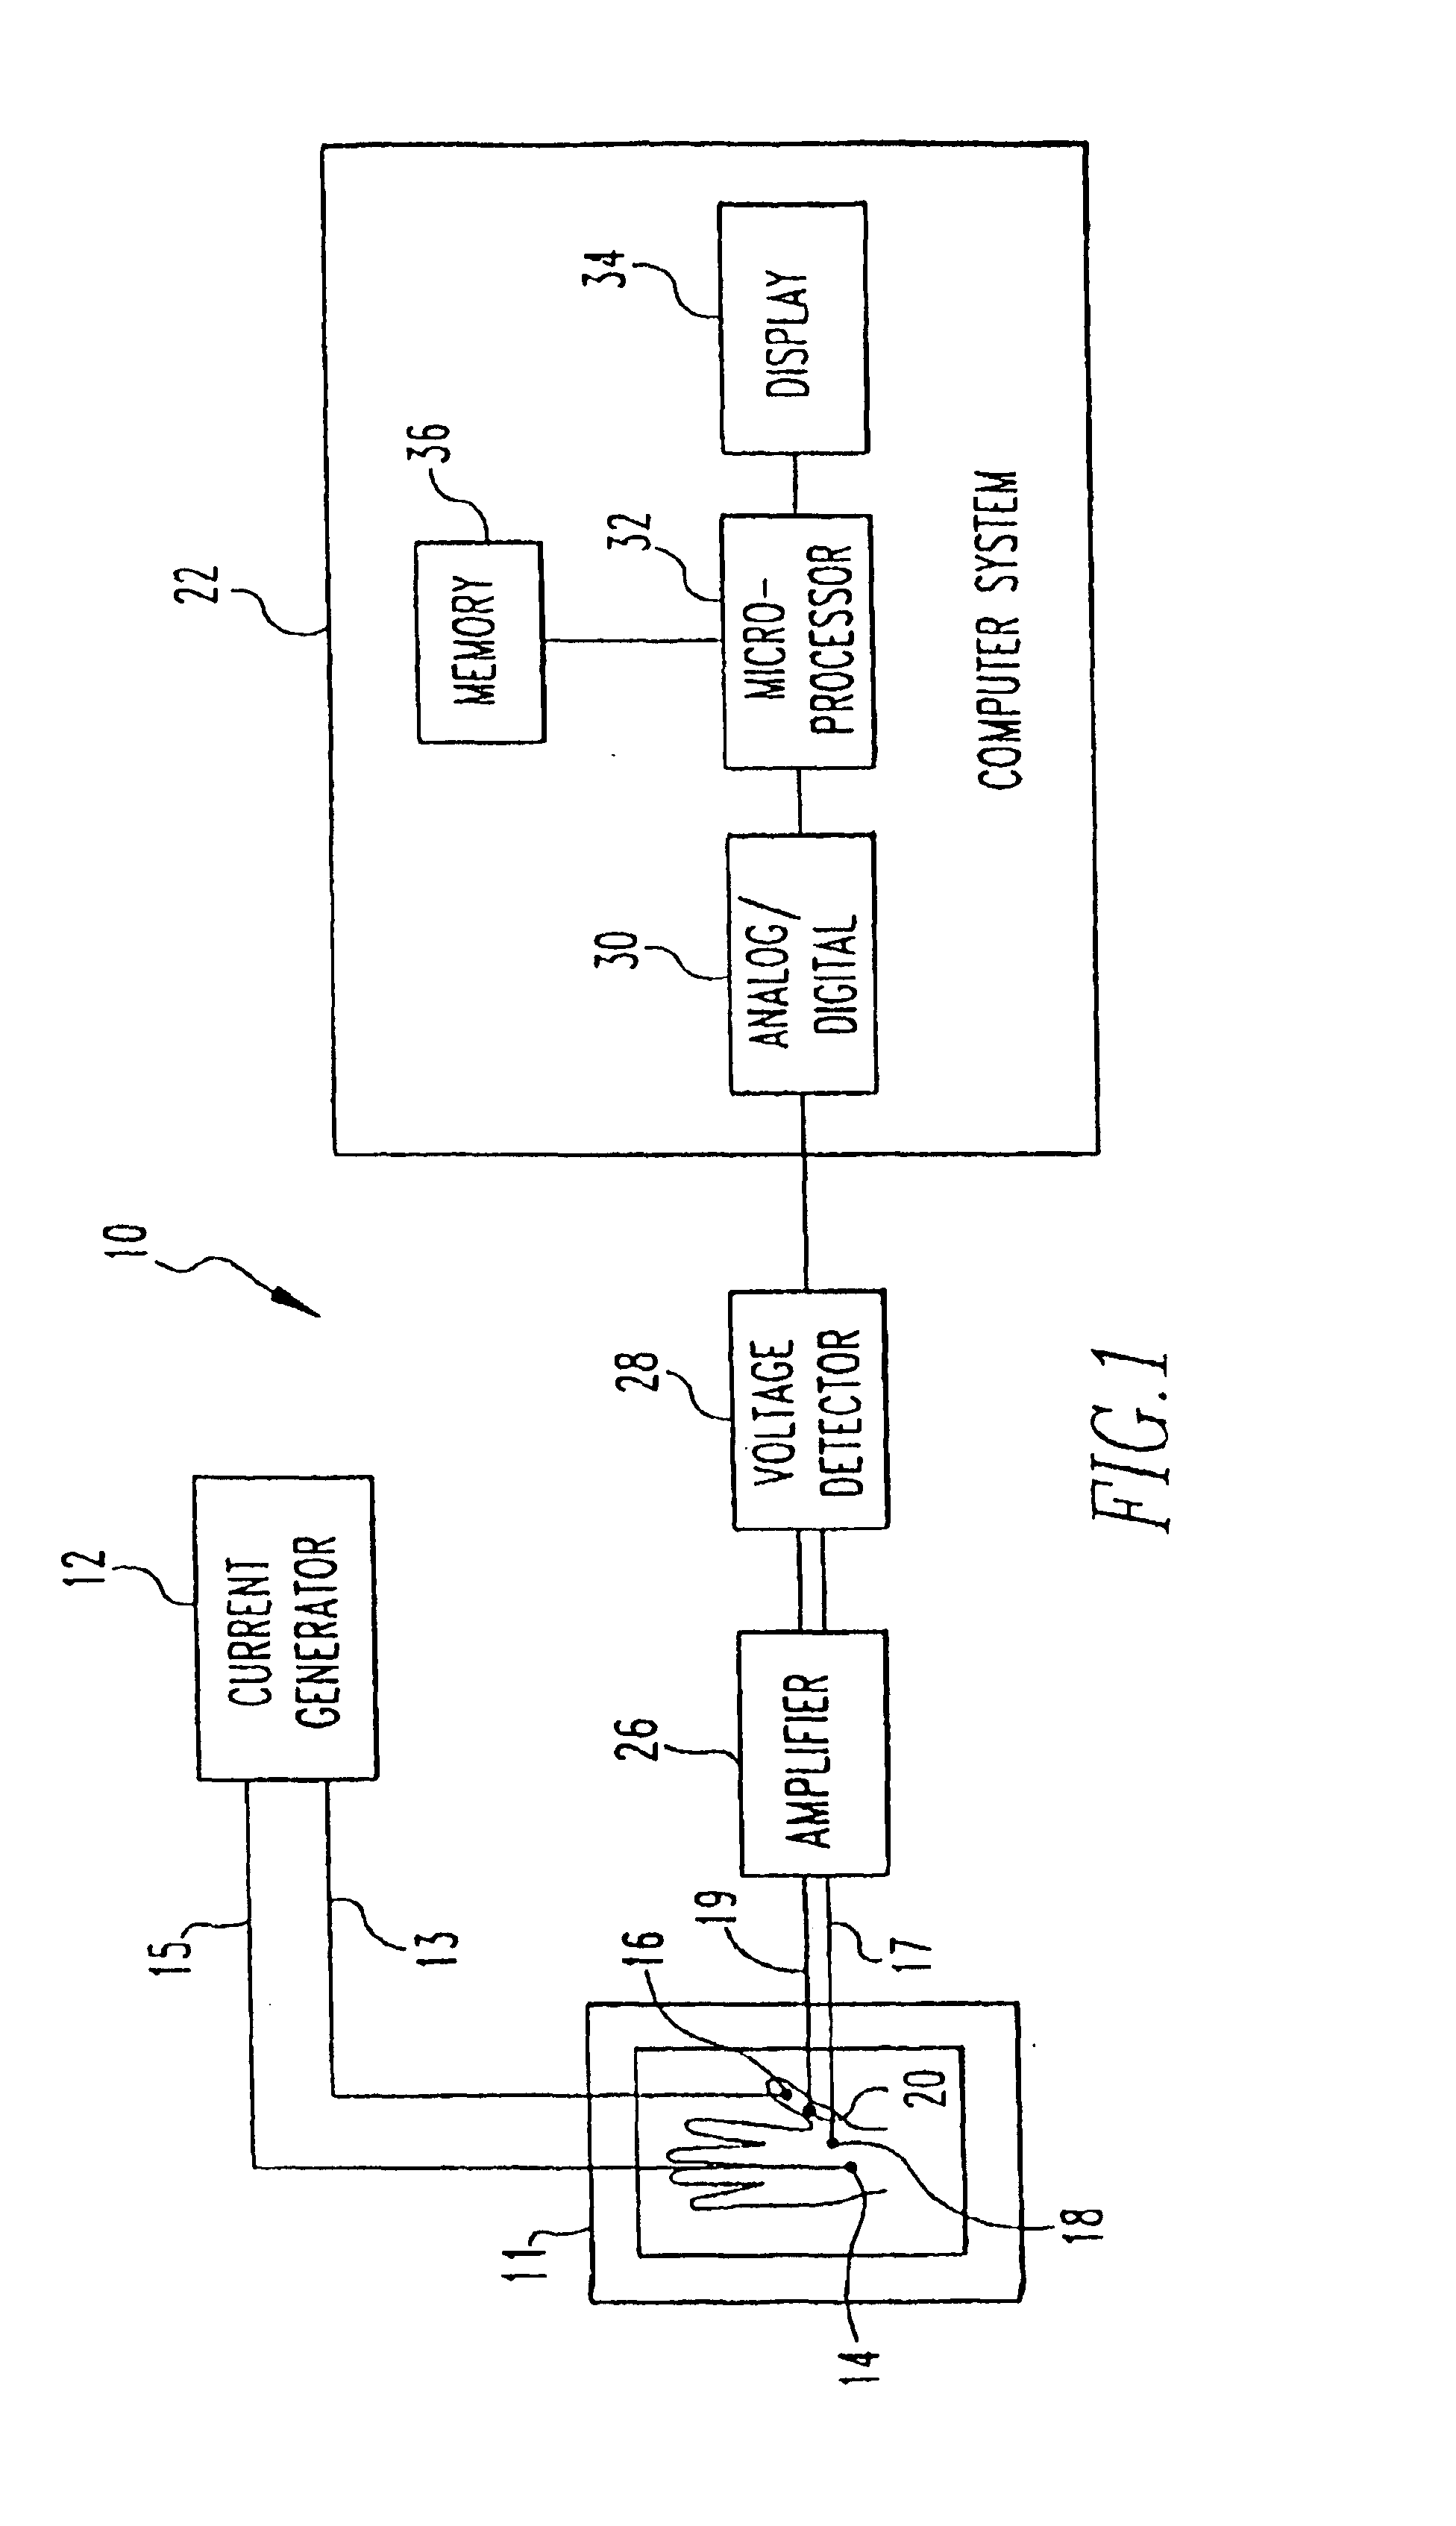 Method and system for biometric recognition based on electric and/or magnetic characteristics